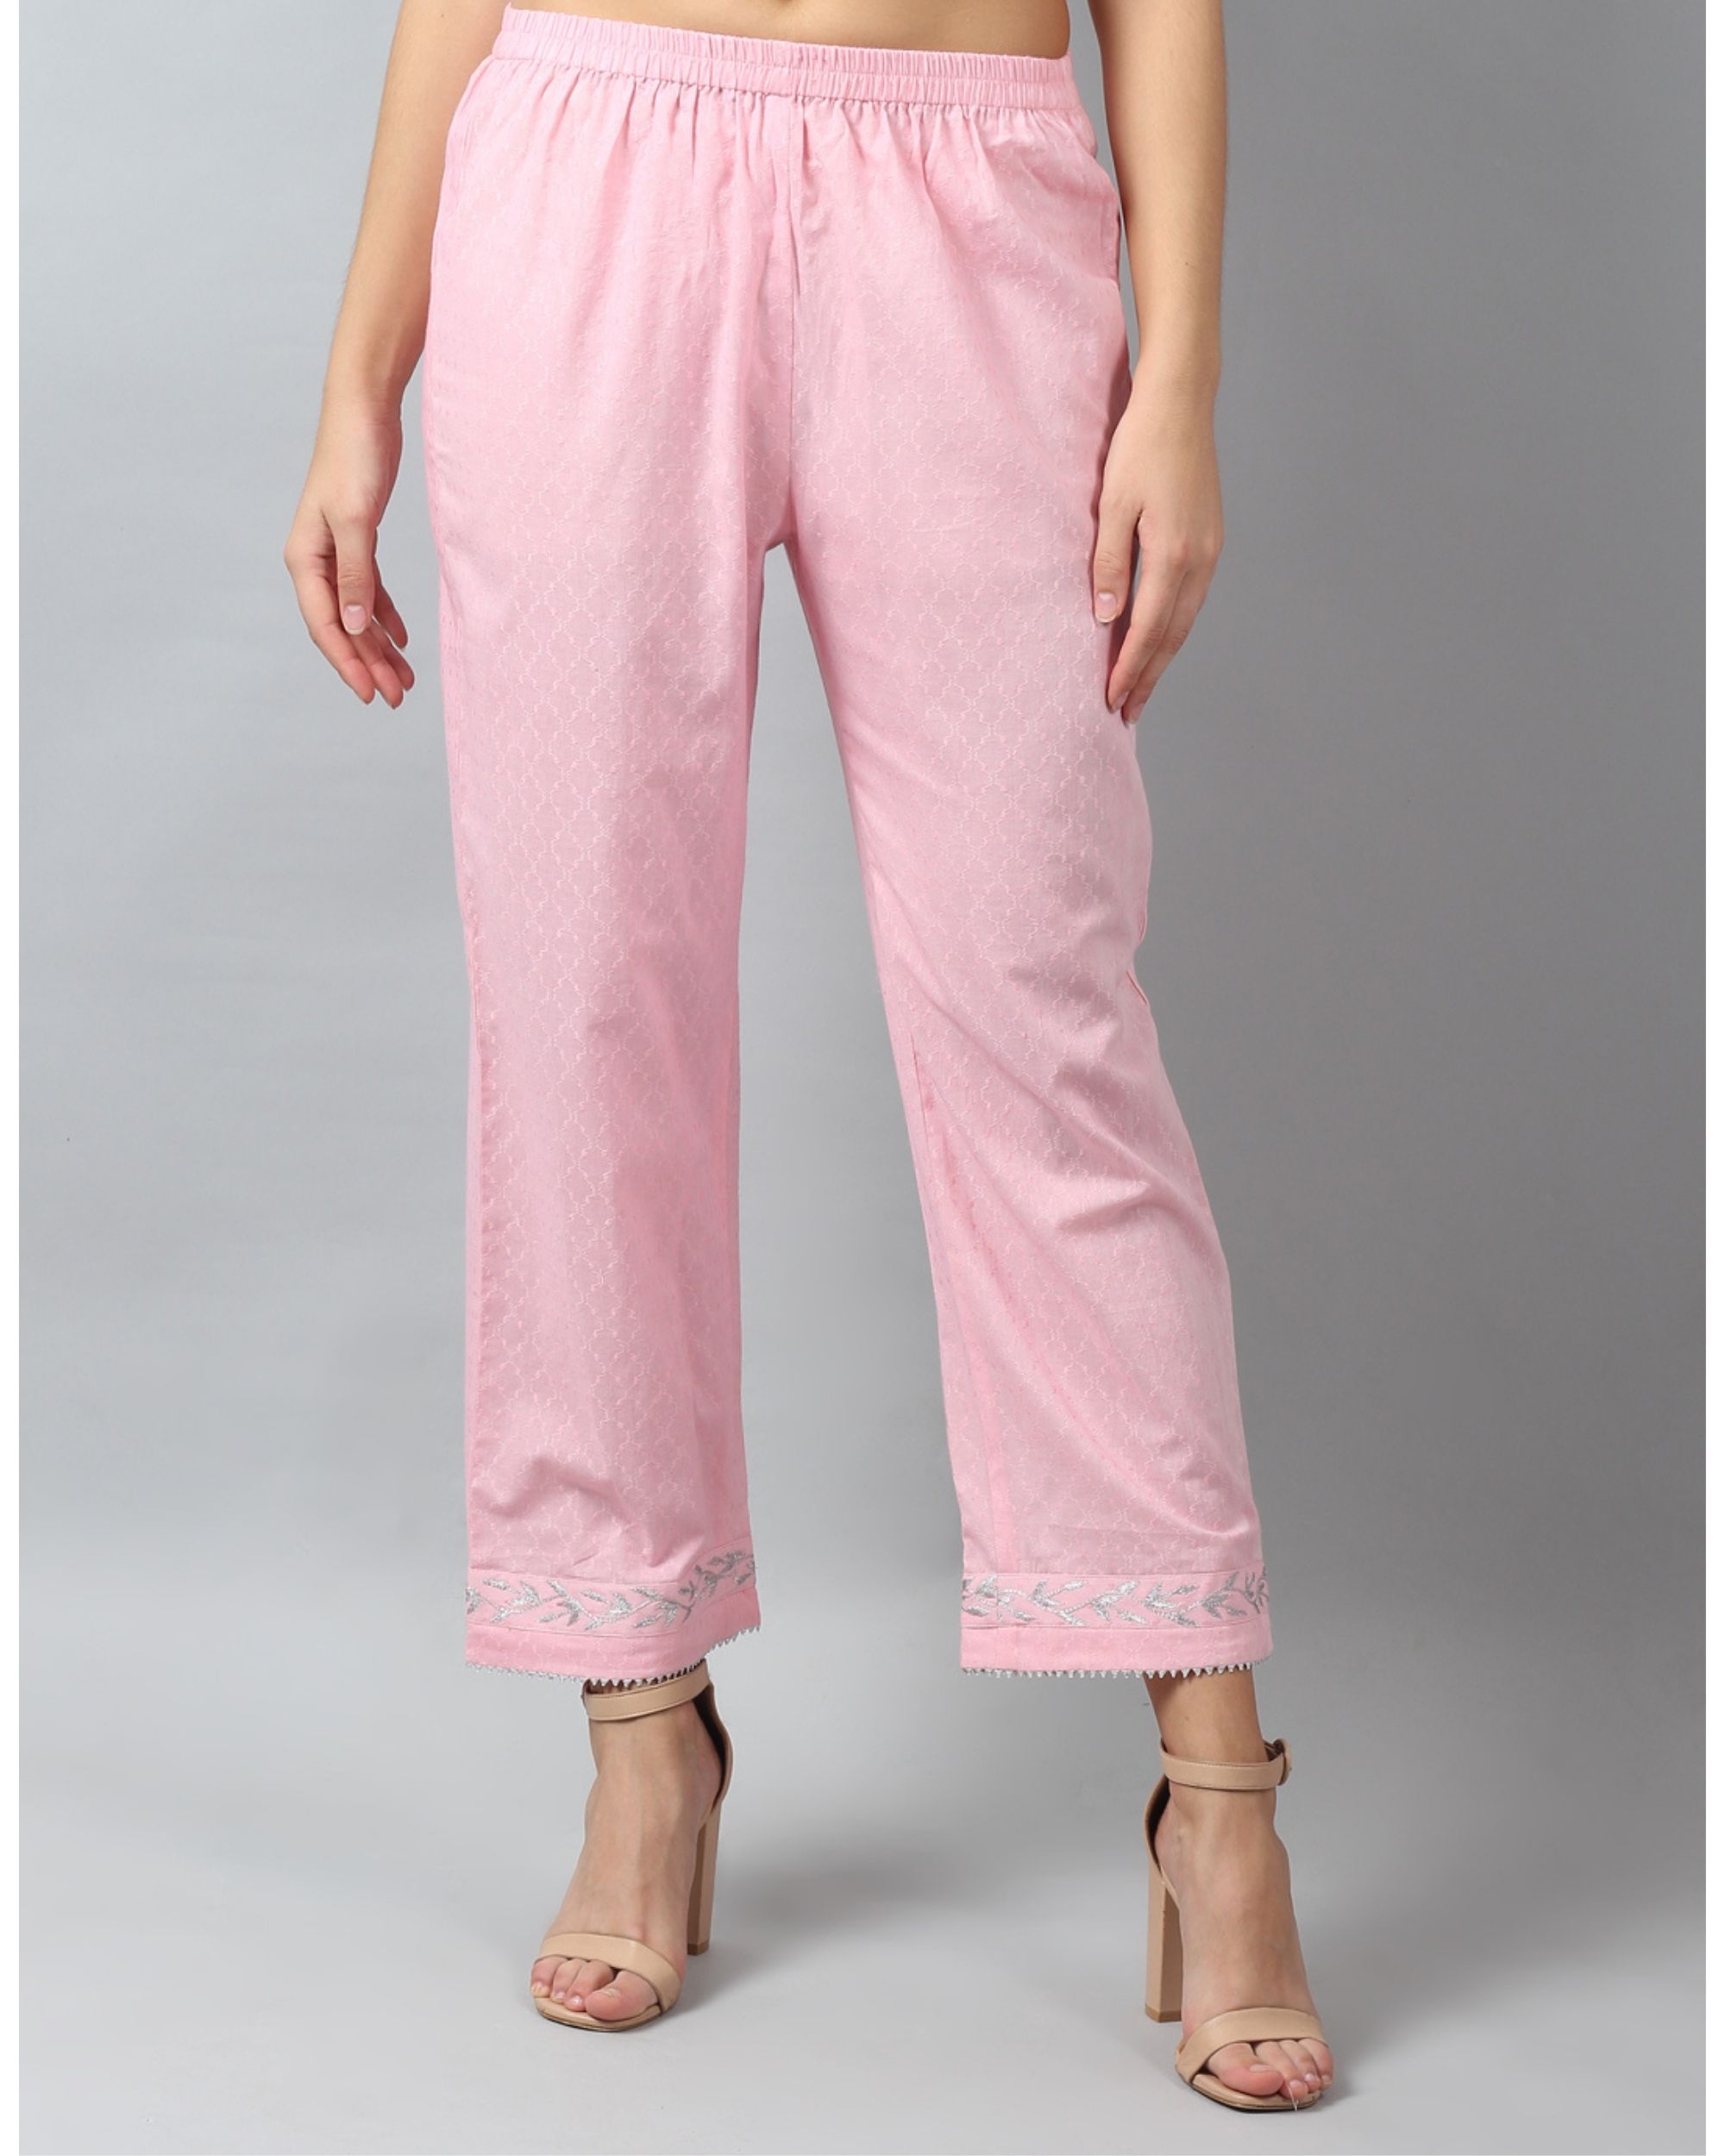 Buy Pink Palazzo Pants, Pink White Color, Rayon Fabric, Boho Palazzo Pants,  Comfortable Trendy Pants for Work Wear, College Wear, Custom Made Online in  India - Etsy